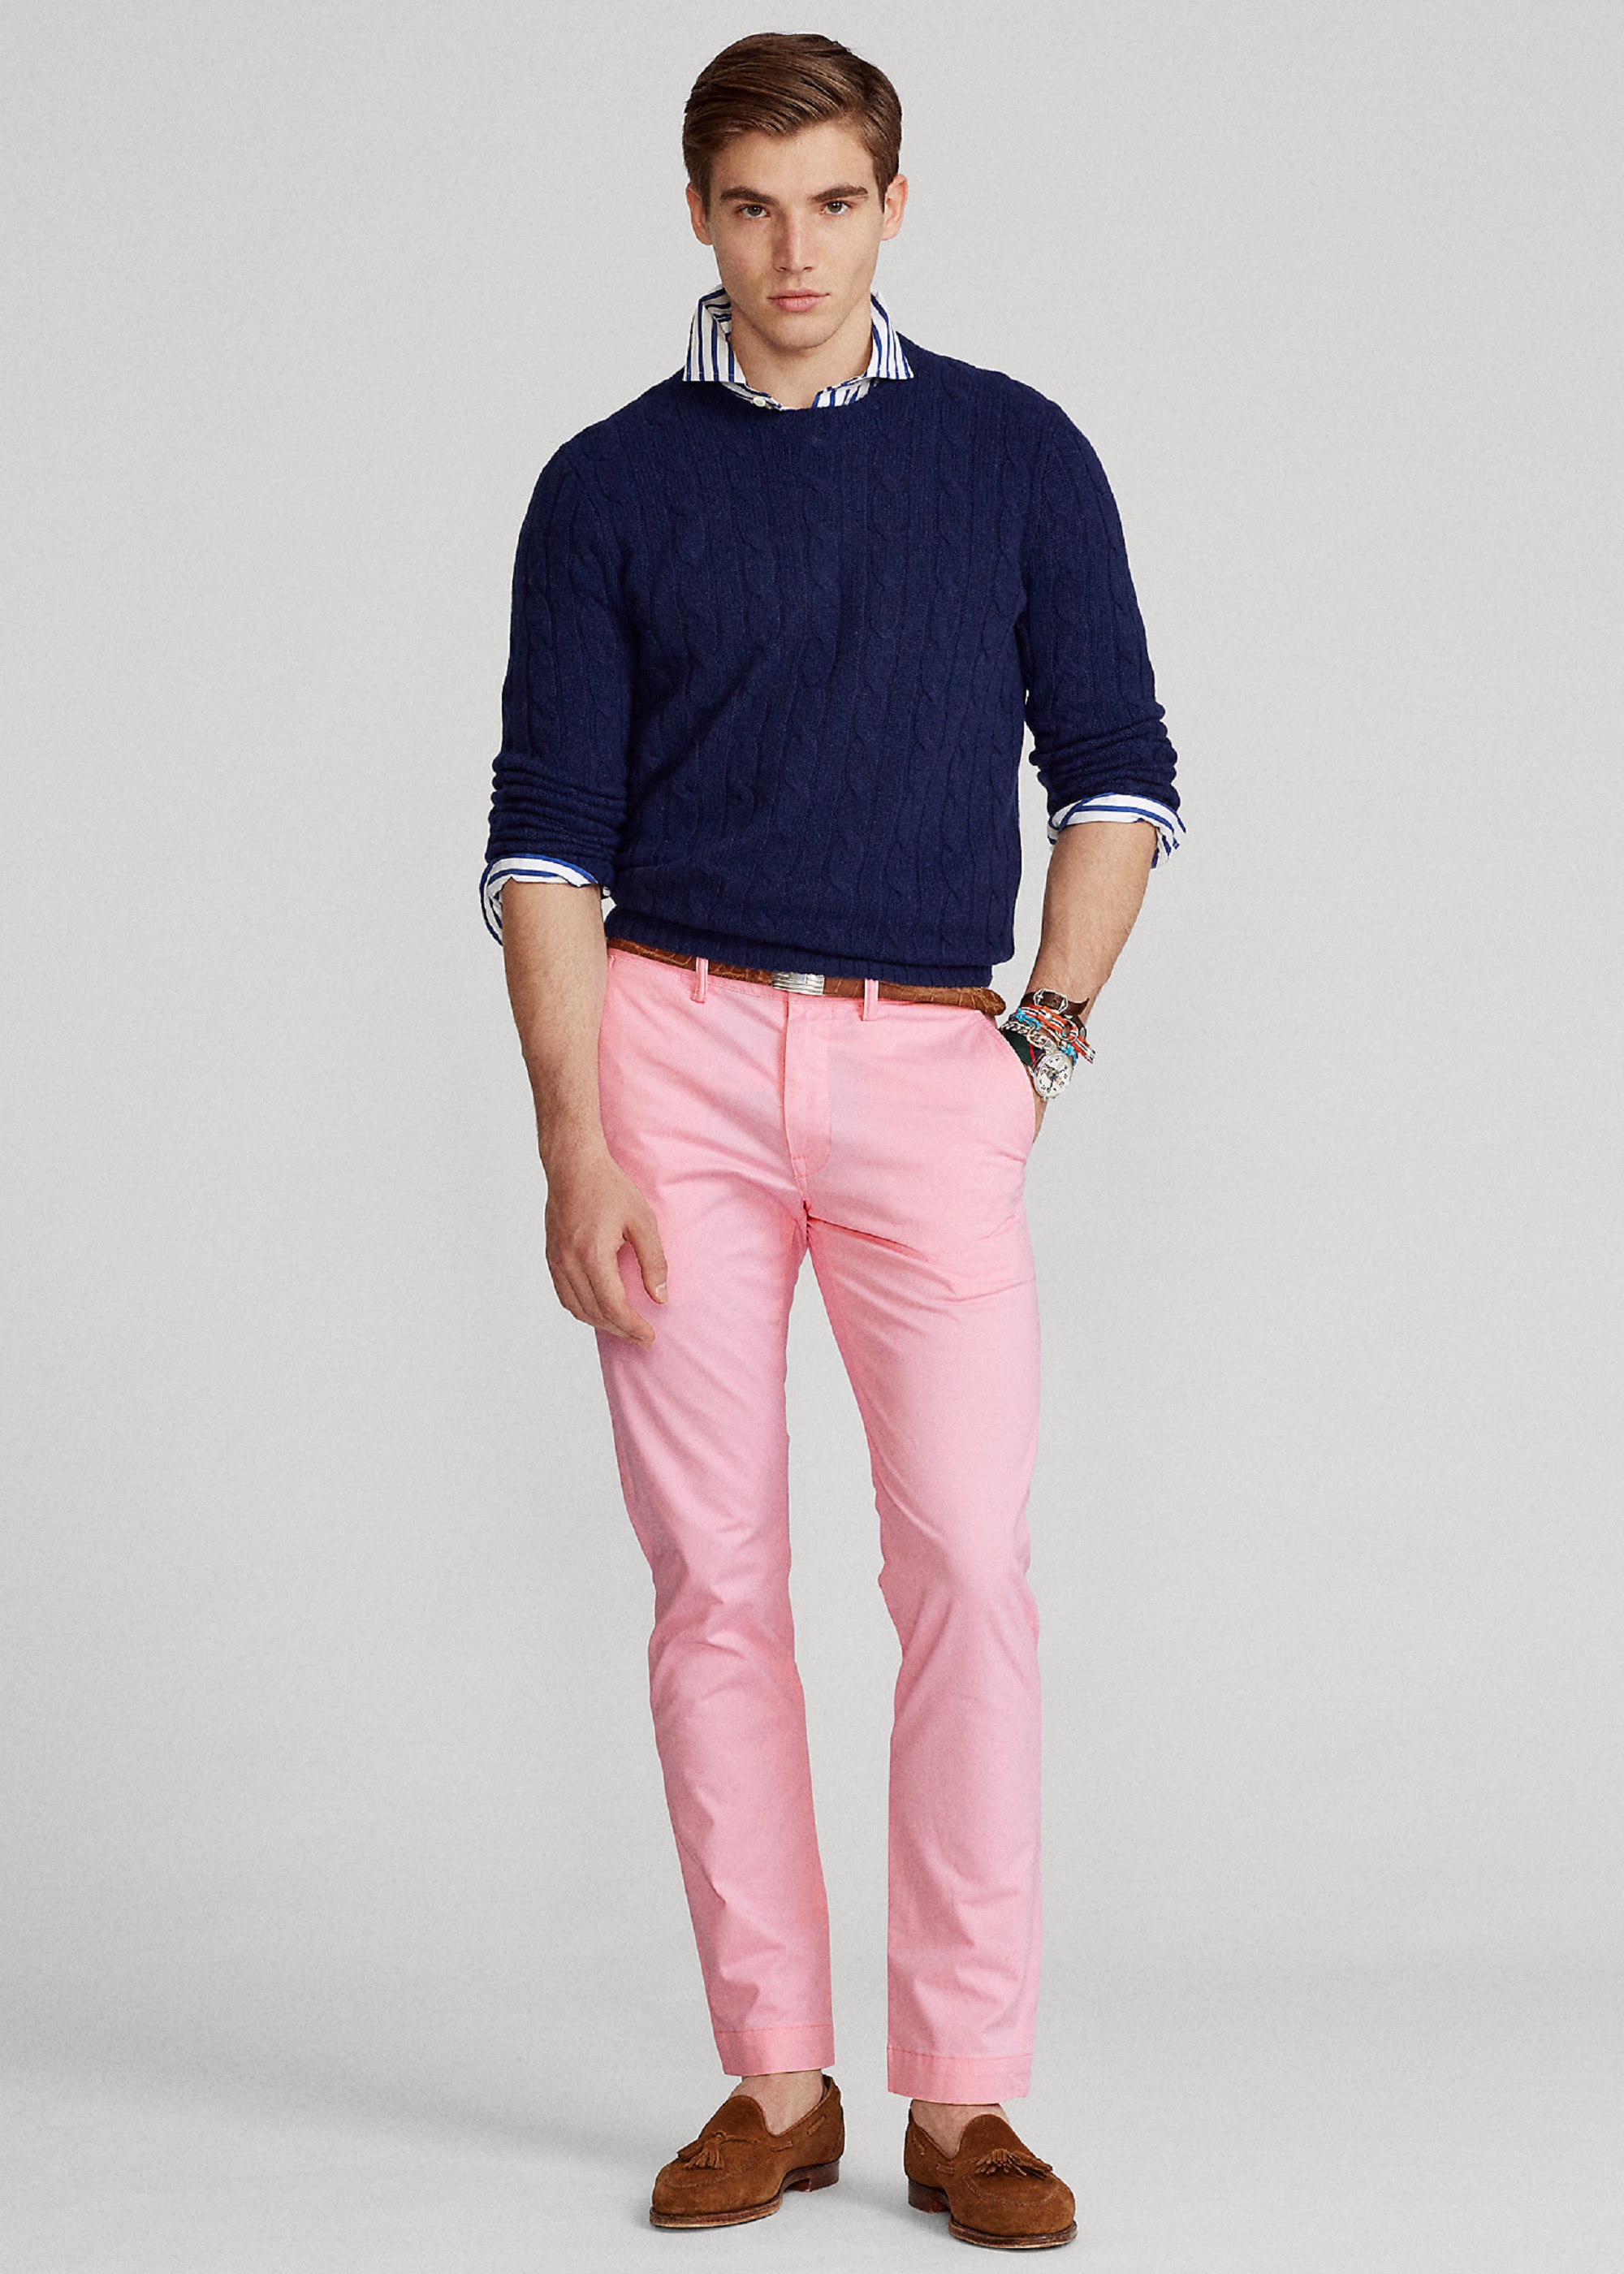 Navy Leather Loafers with Pink Pants Outfits For Men (4 ideas & outfits) |  Lookastic